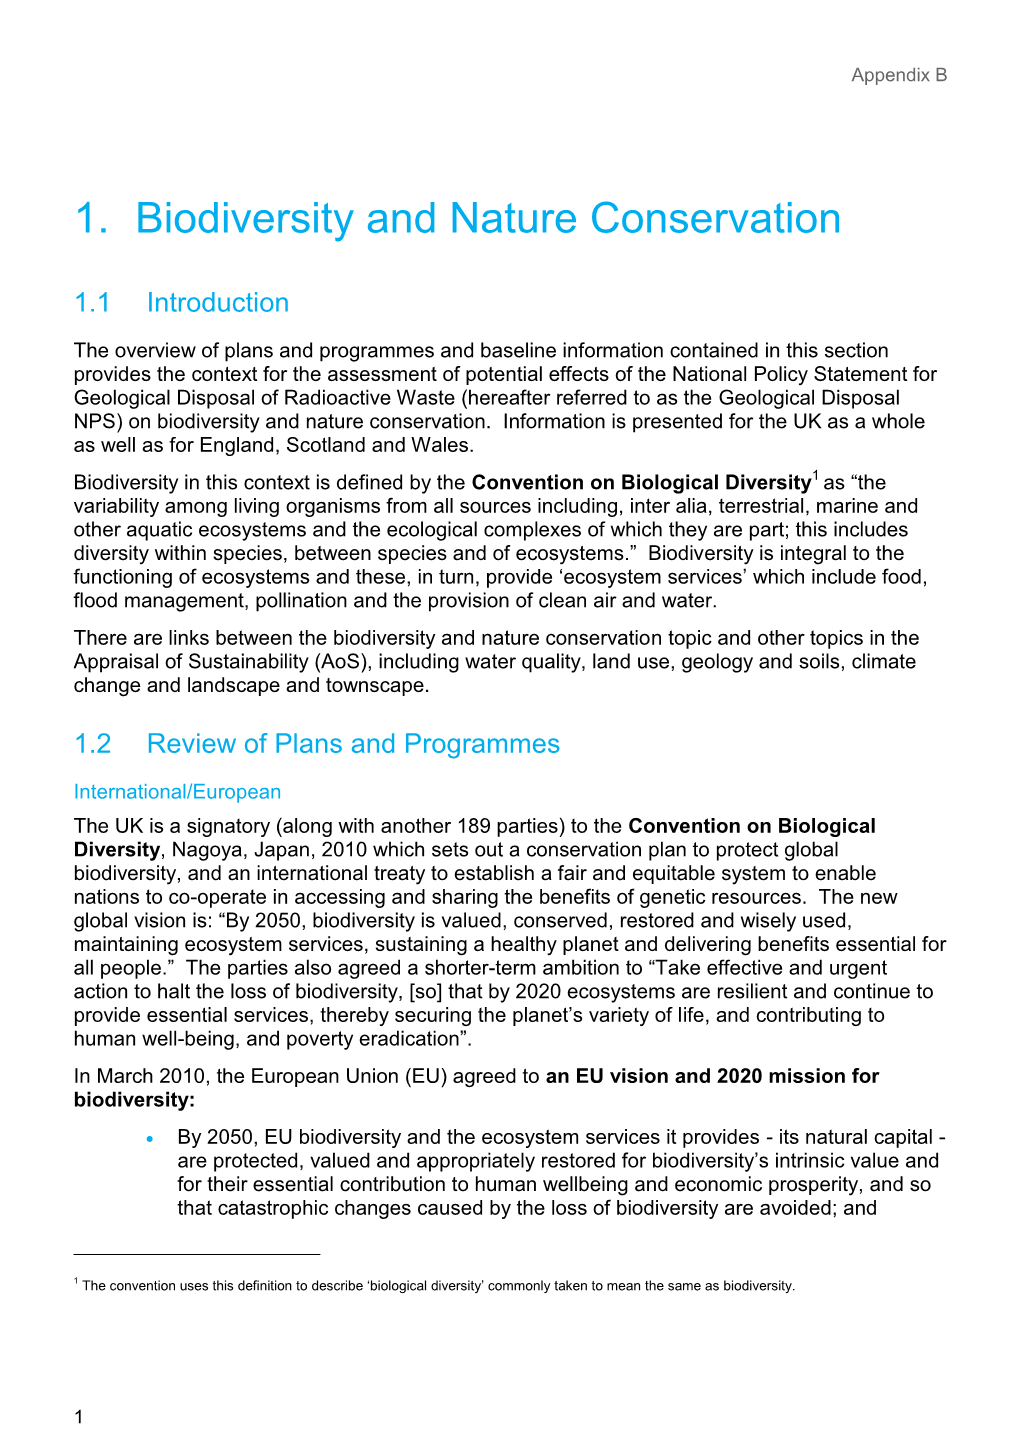 1. Biodiversity and Nature Conservation